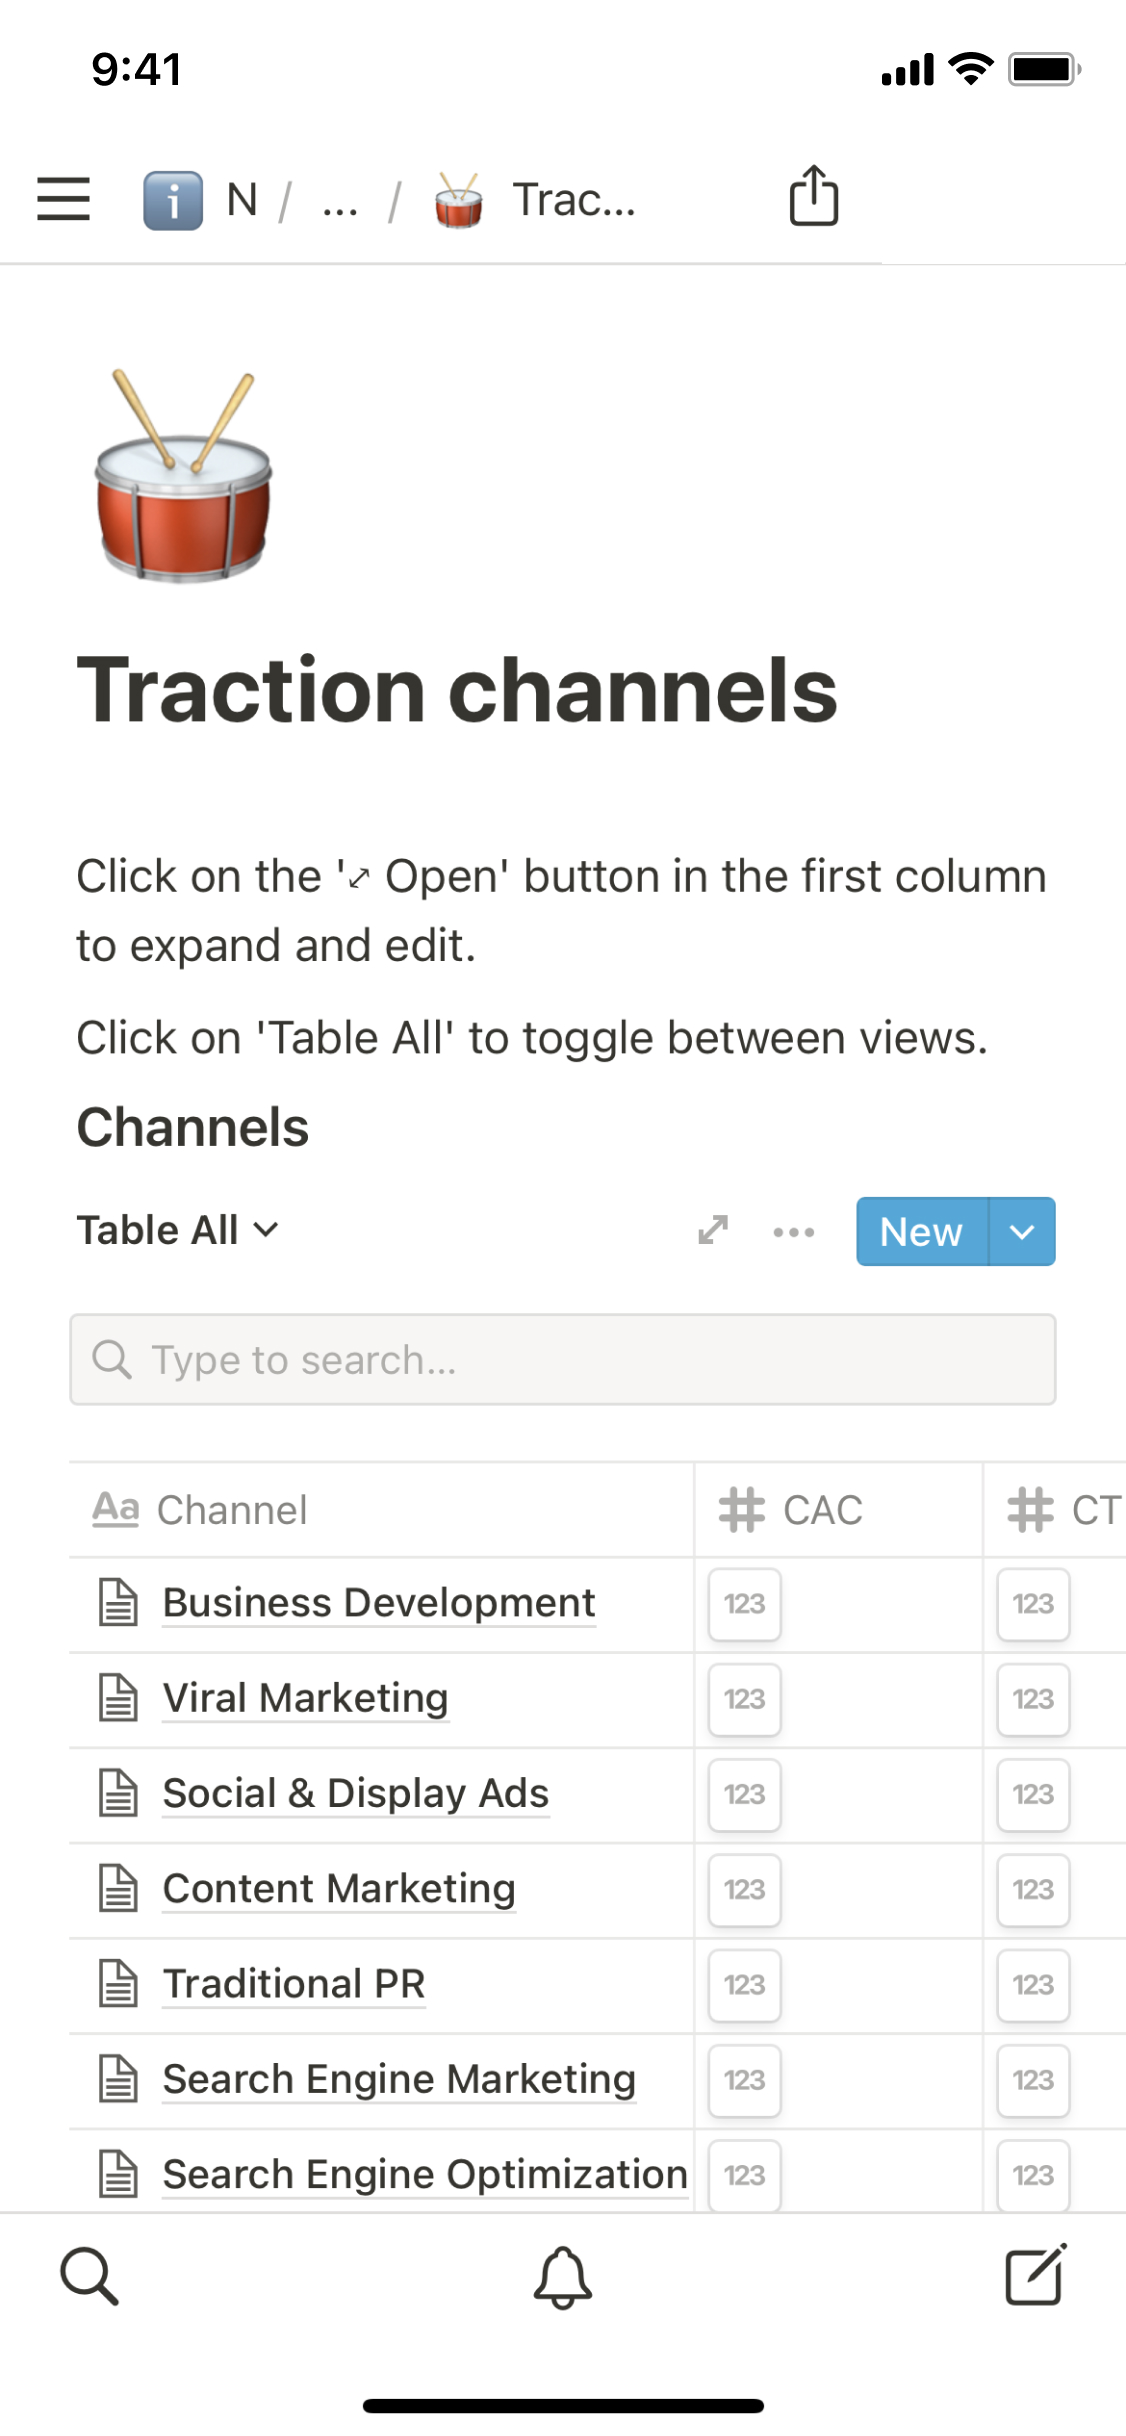 The mobile image for the Traction channels  template